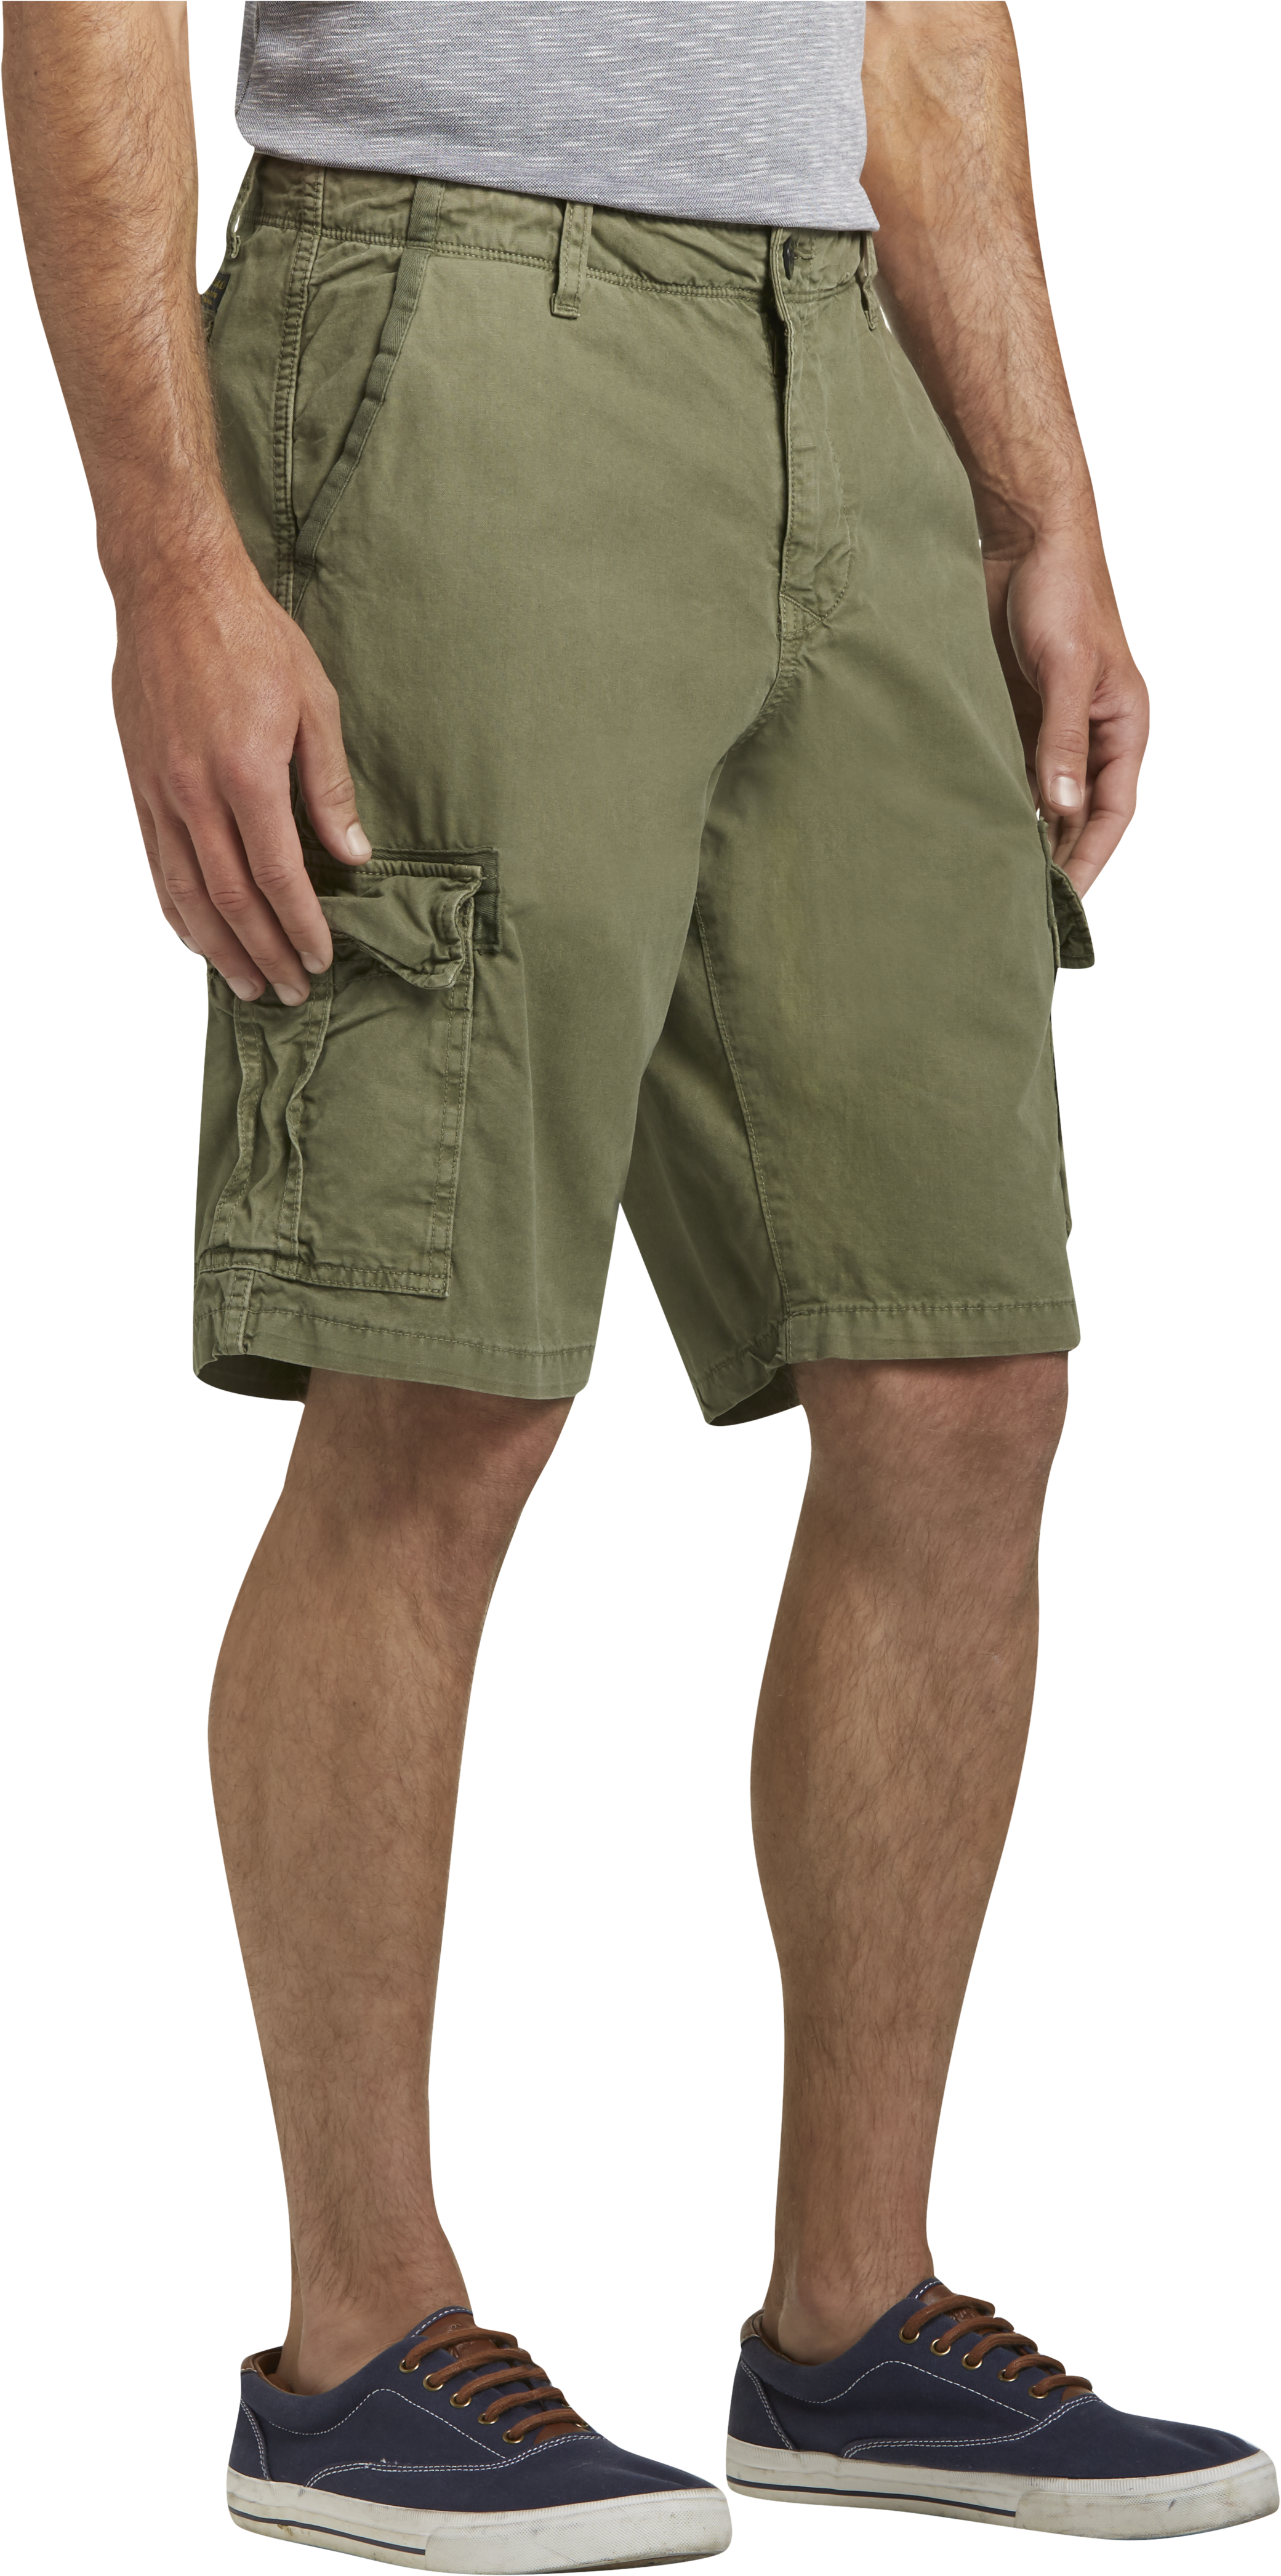 lucky brand shorts sale